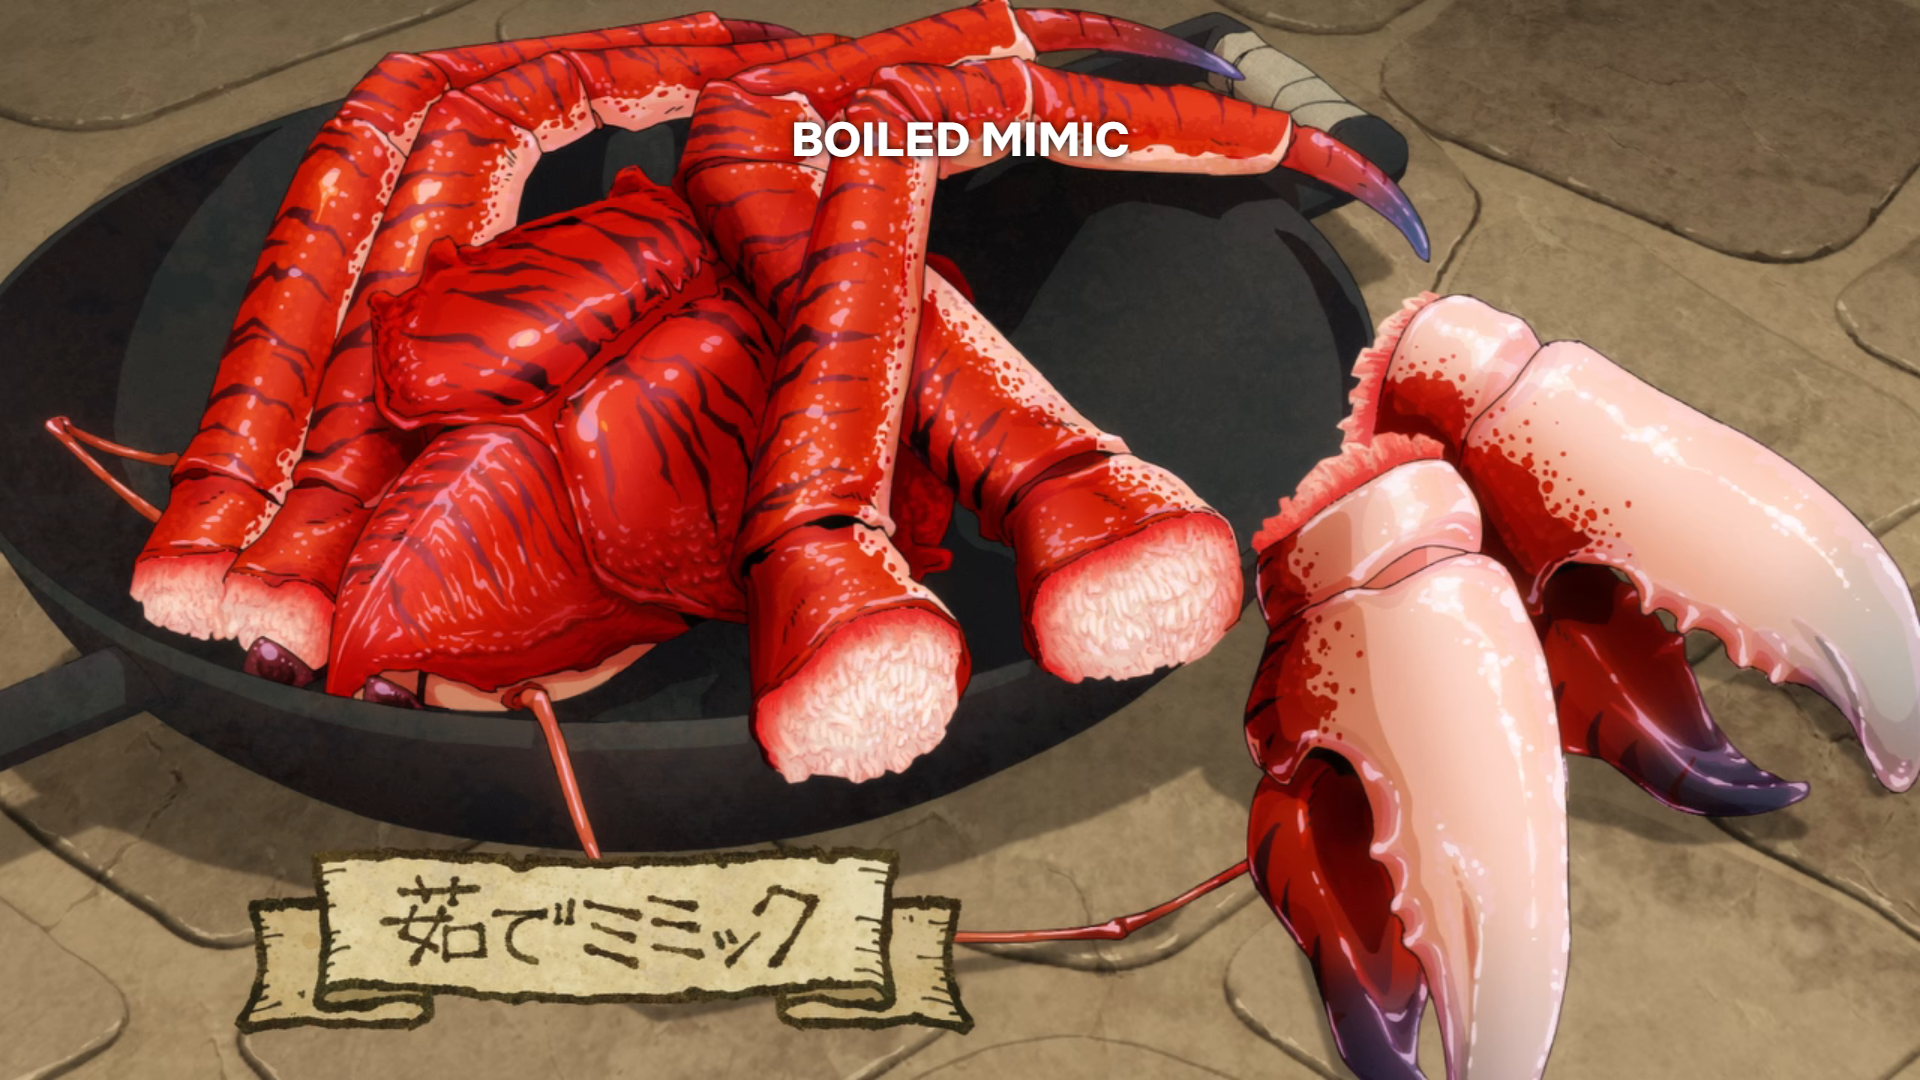 Delicious in Dungeon Episode 6 lets us know that a mimic is nothing more than an overgrown hermit crab